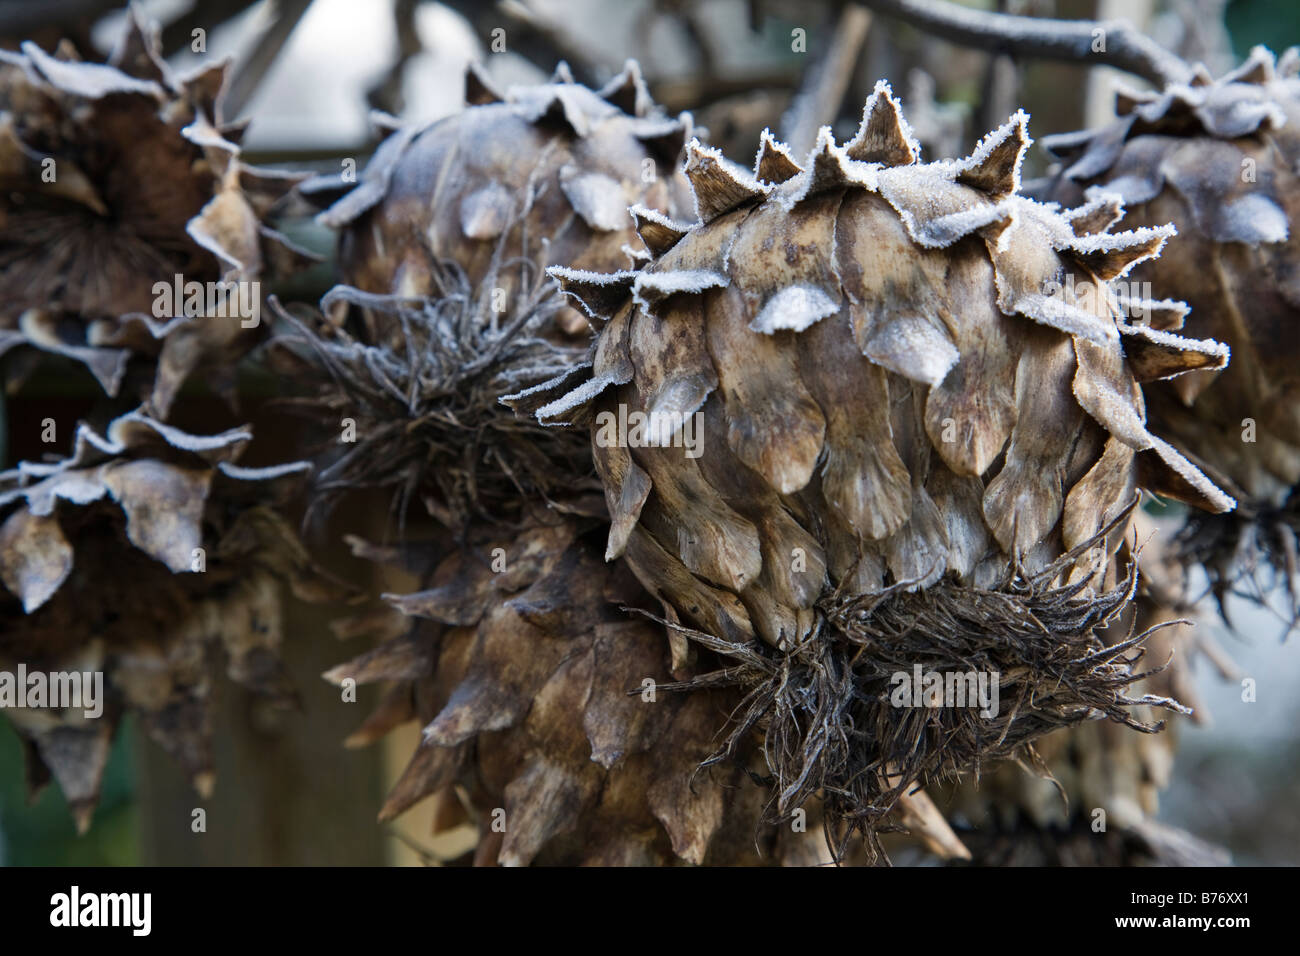 Close-up of a Cardoon (Cynara cardunculus) also called the artichoke thistle with a light covering of frost, Surrey, England. Stock Photo